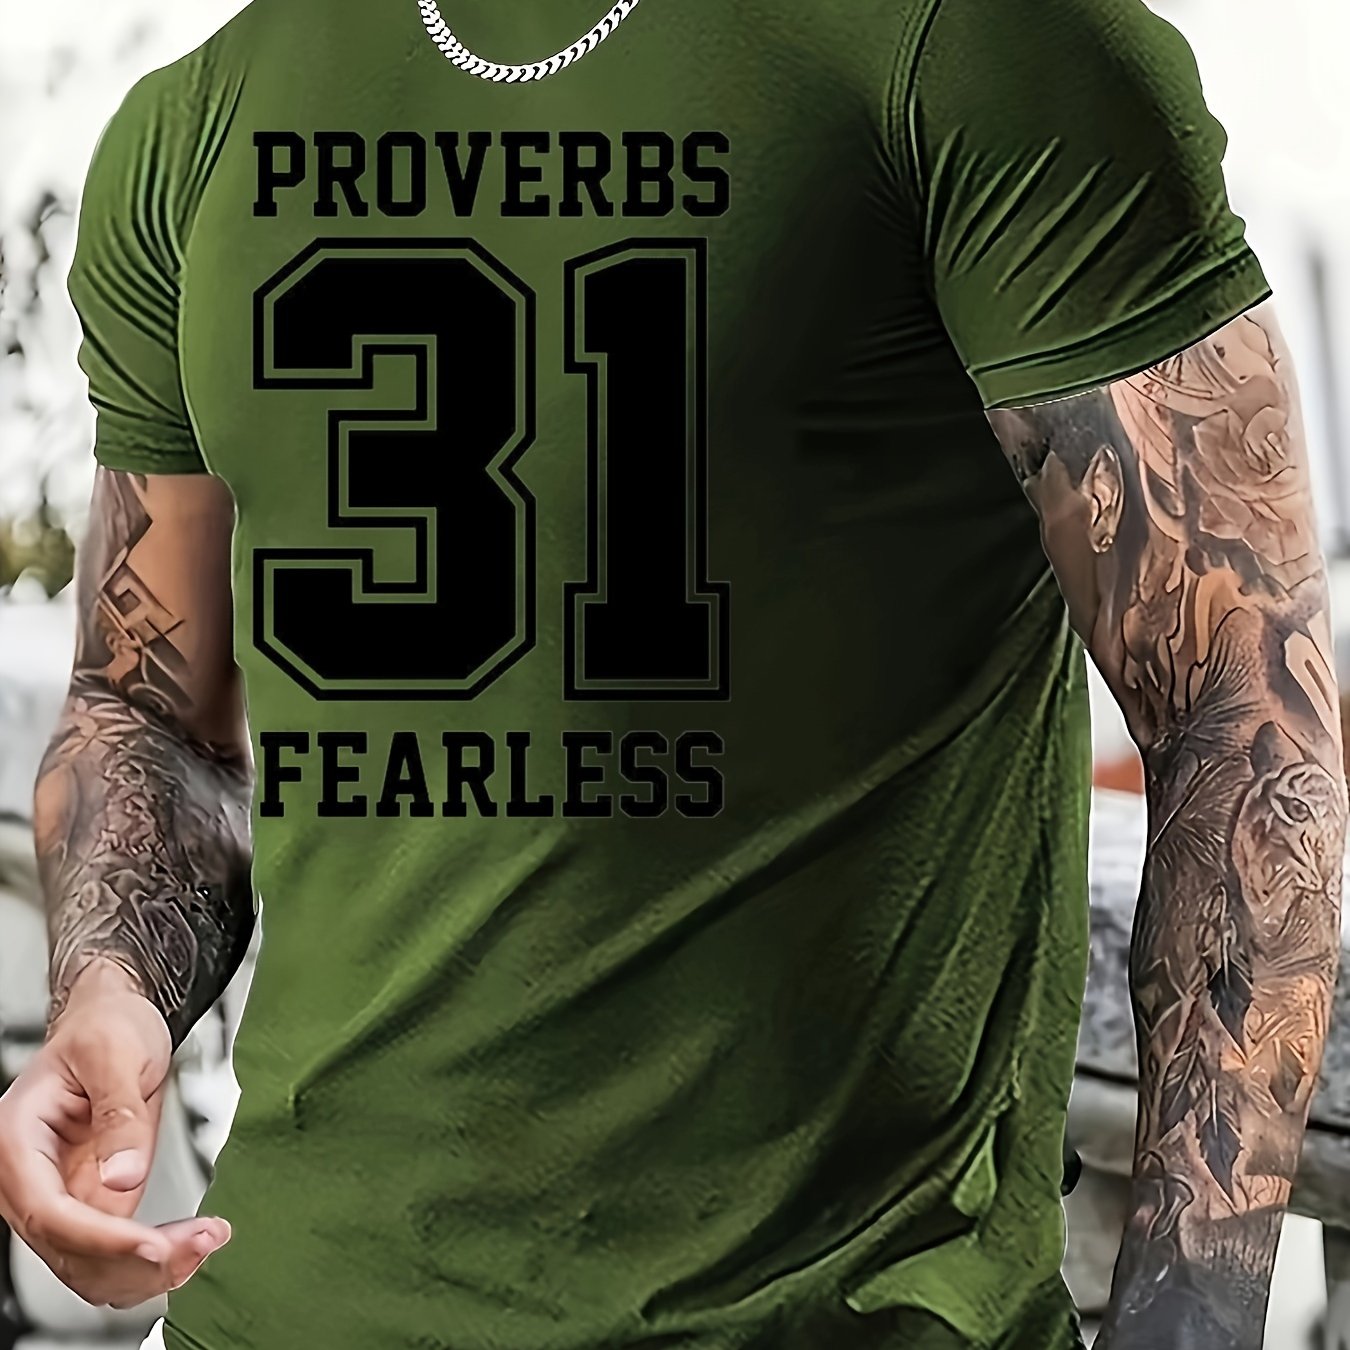 Proverbs 31 Fearless Plus Size Men's Christian T-shirt claimedbygoddesigns